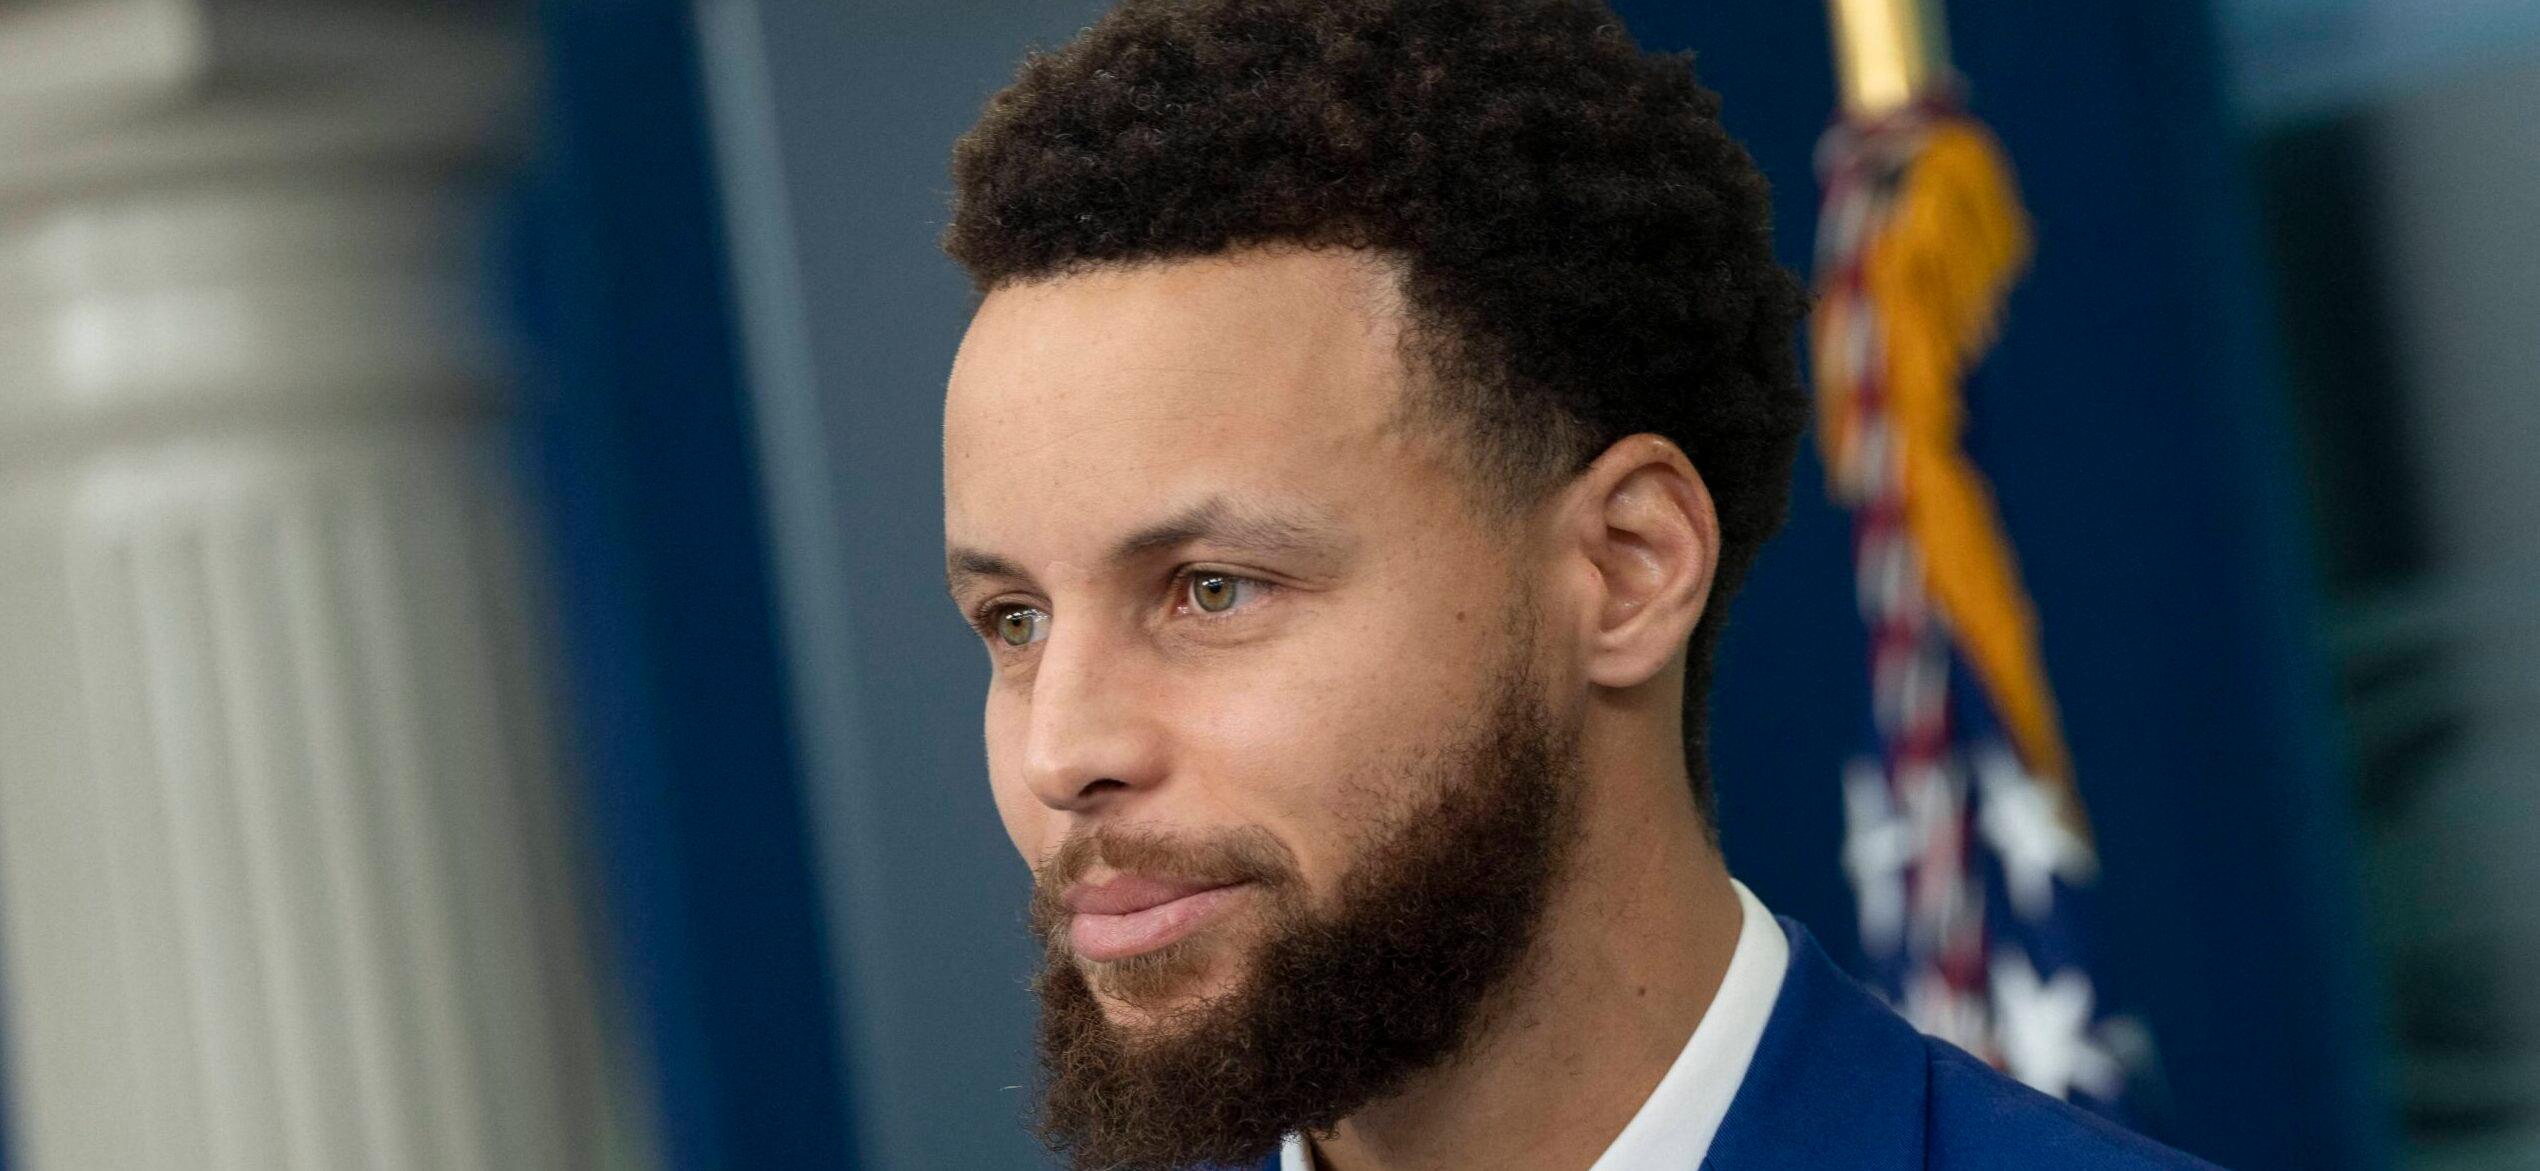 Stephen Curry representing Golden State Warriors Attend White House Daily Briefing